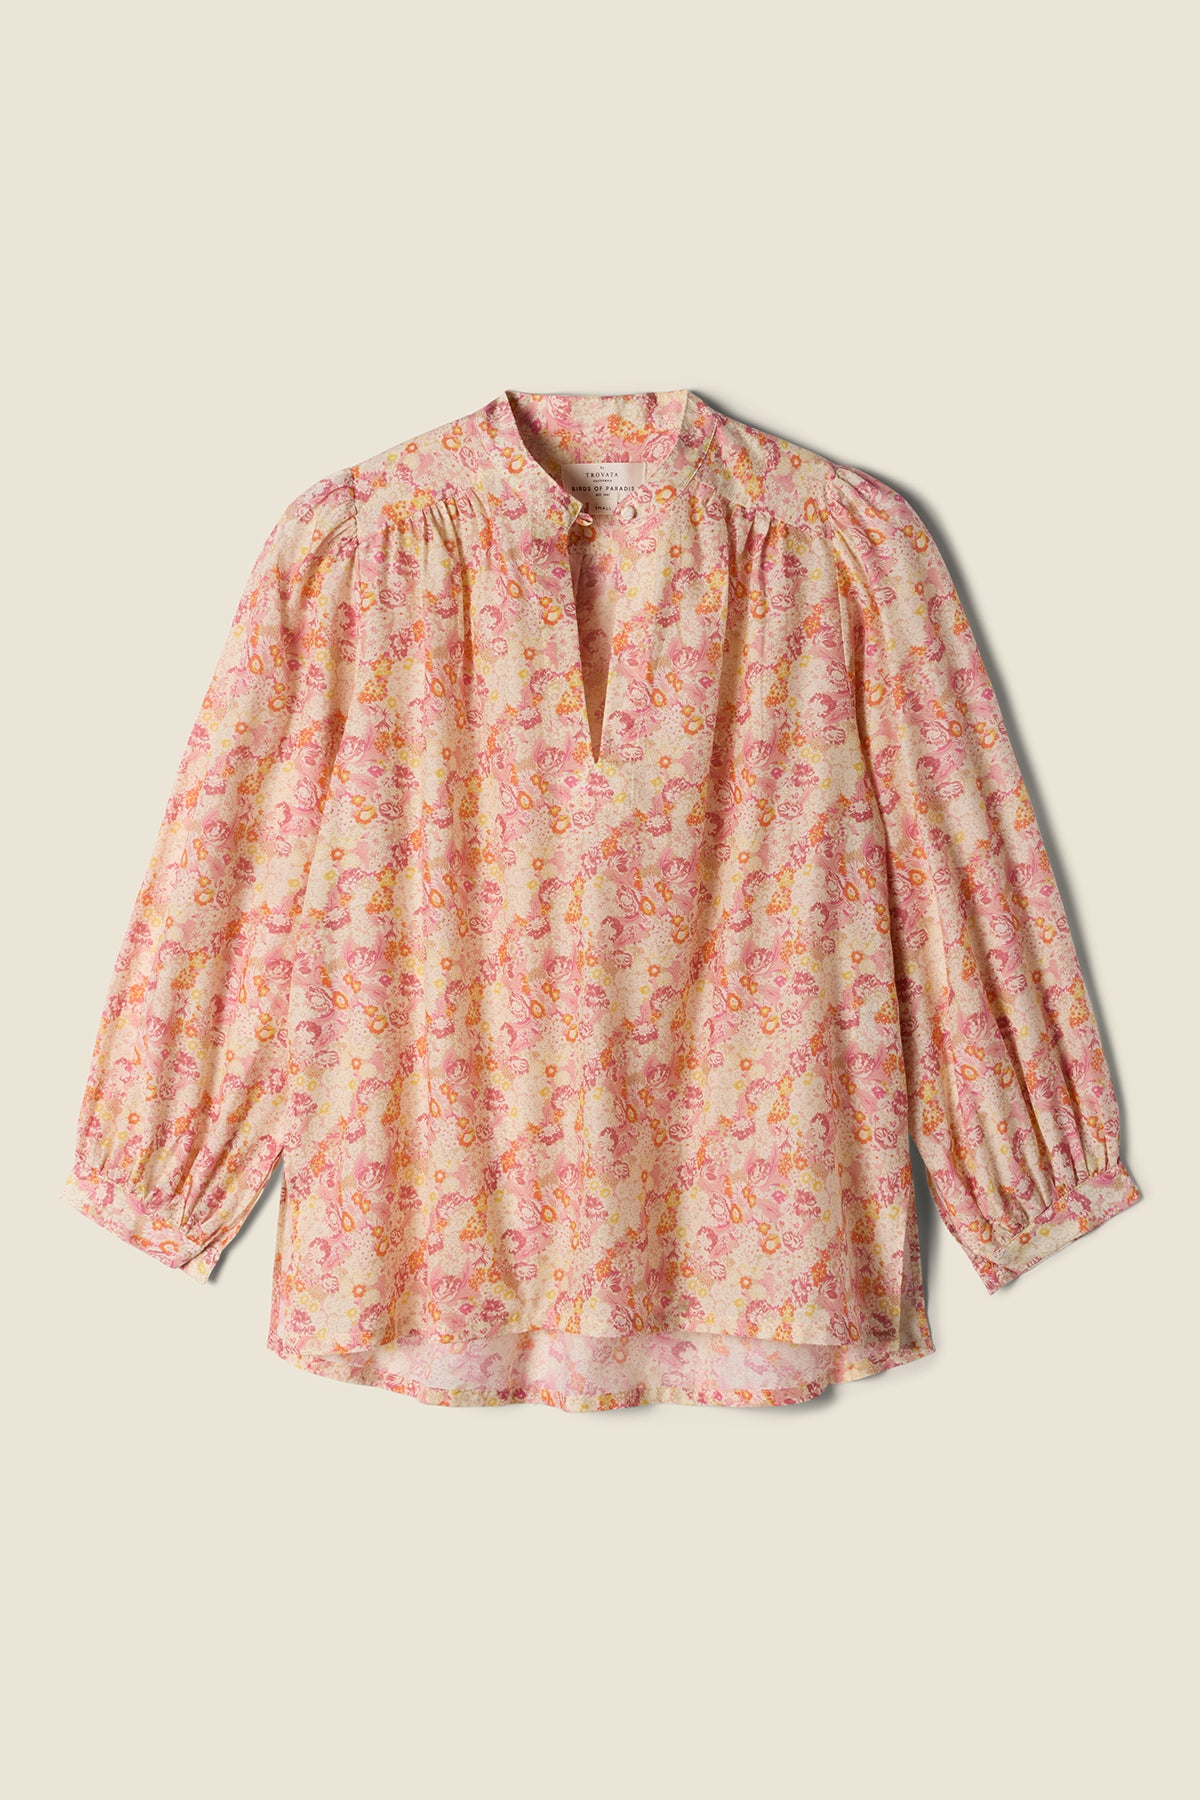 Bailey Blouse Pink Currant